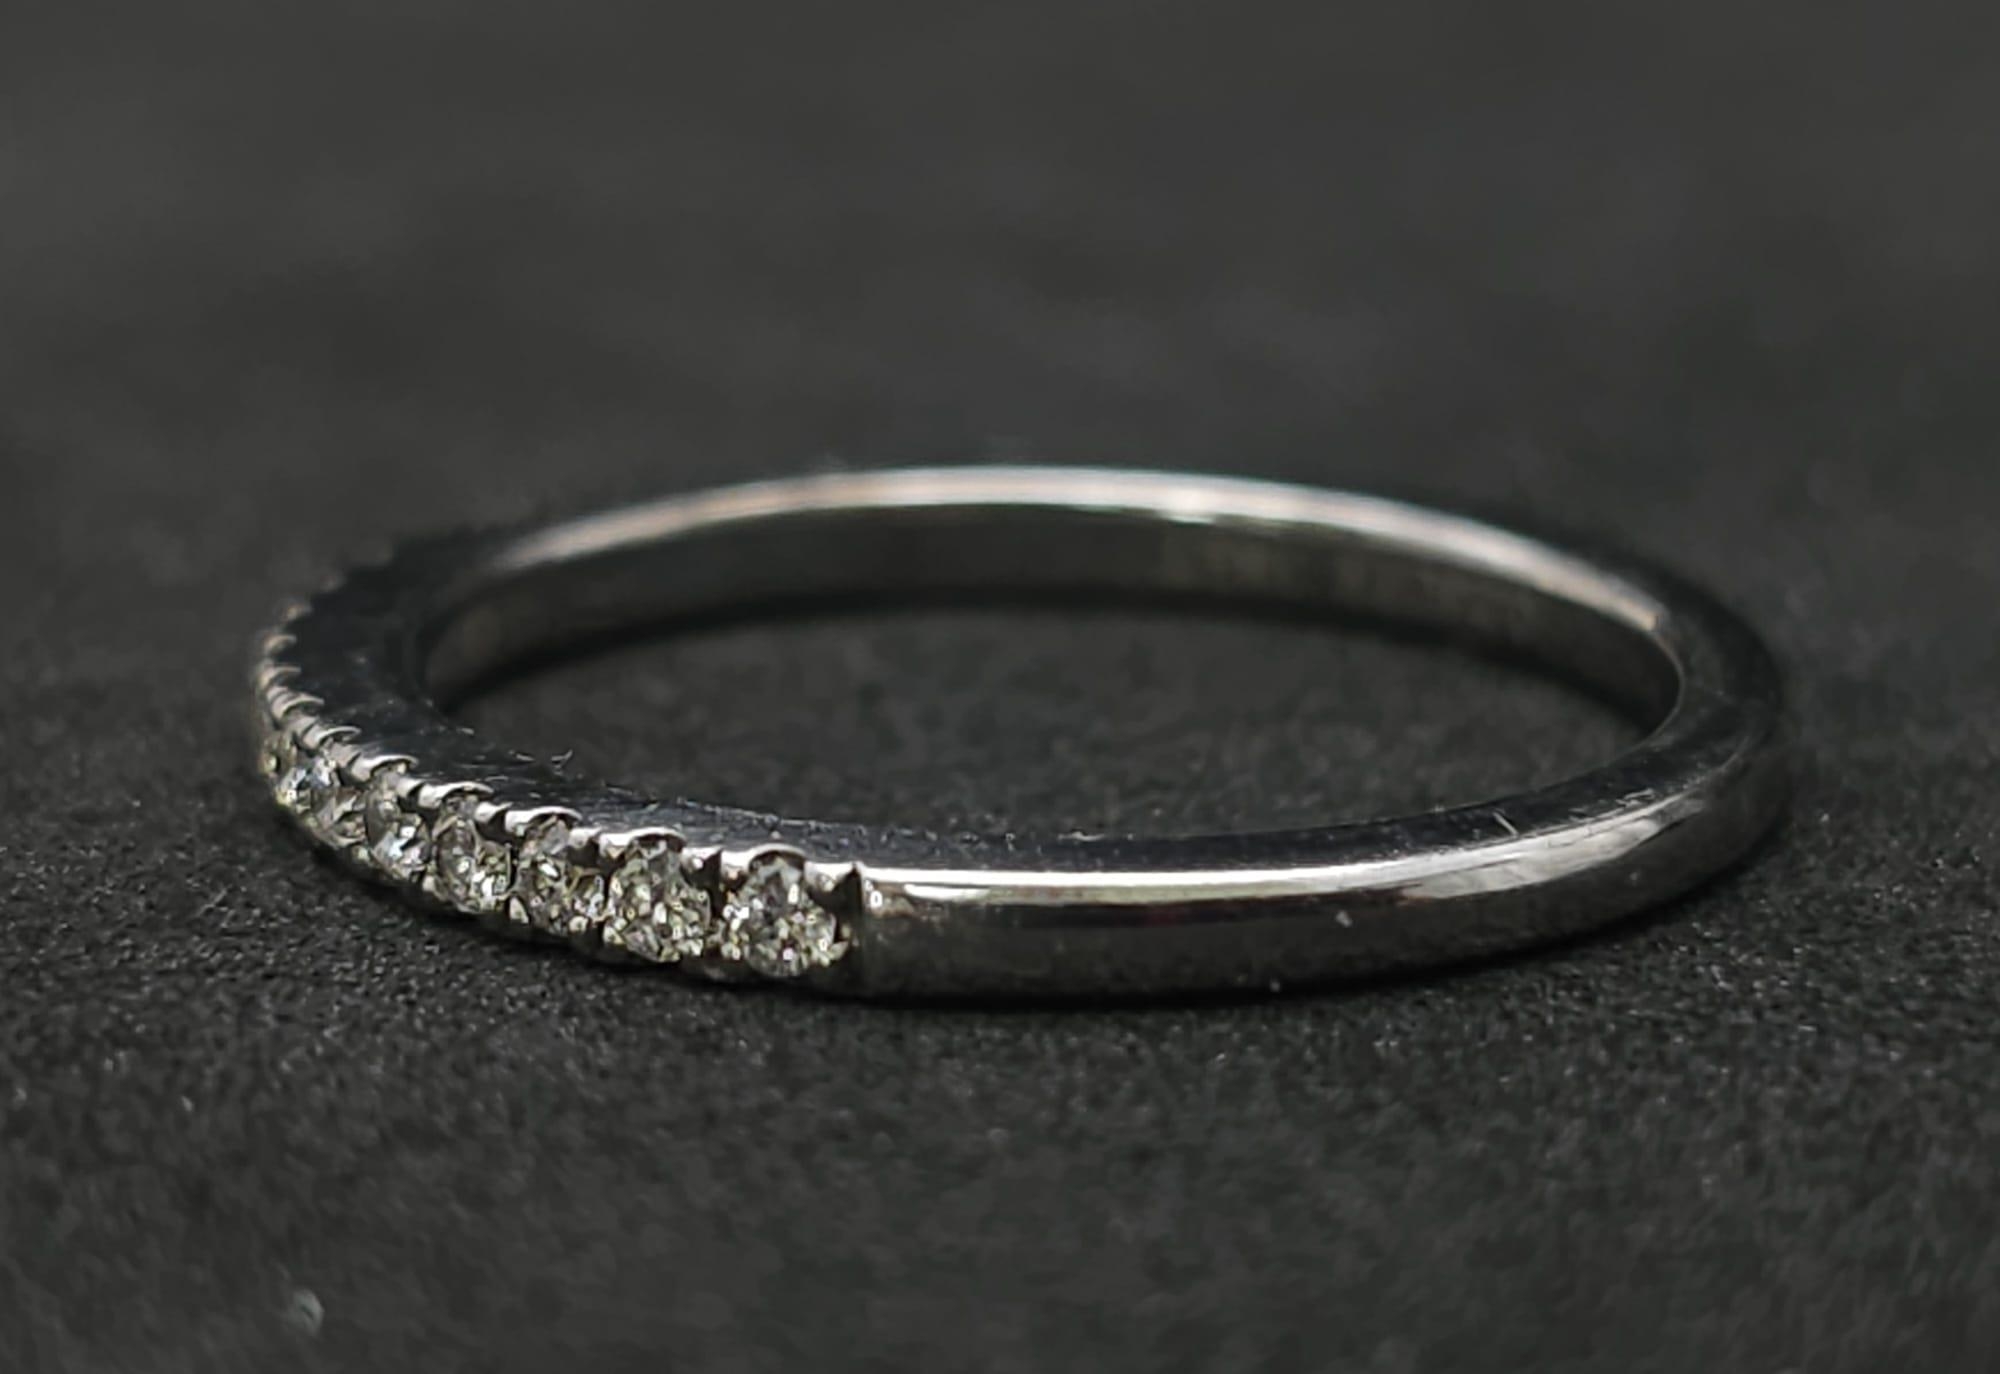 18K WHITE GOLD 0.23CT DIAMOND BAND RING ""YOU KNOW THE NAME"" VERA WANG FROM THE LOVE COLLECTION. - Image 5 of 8